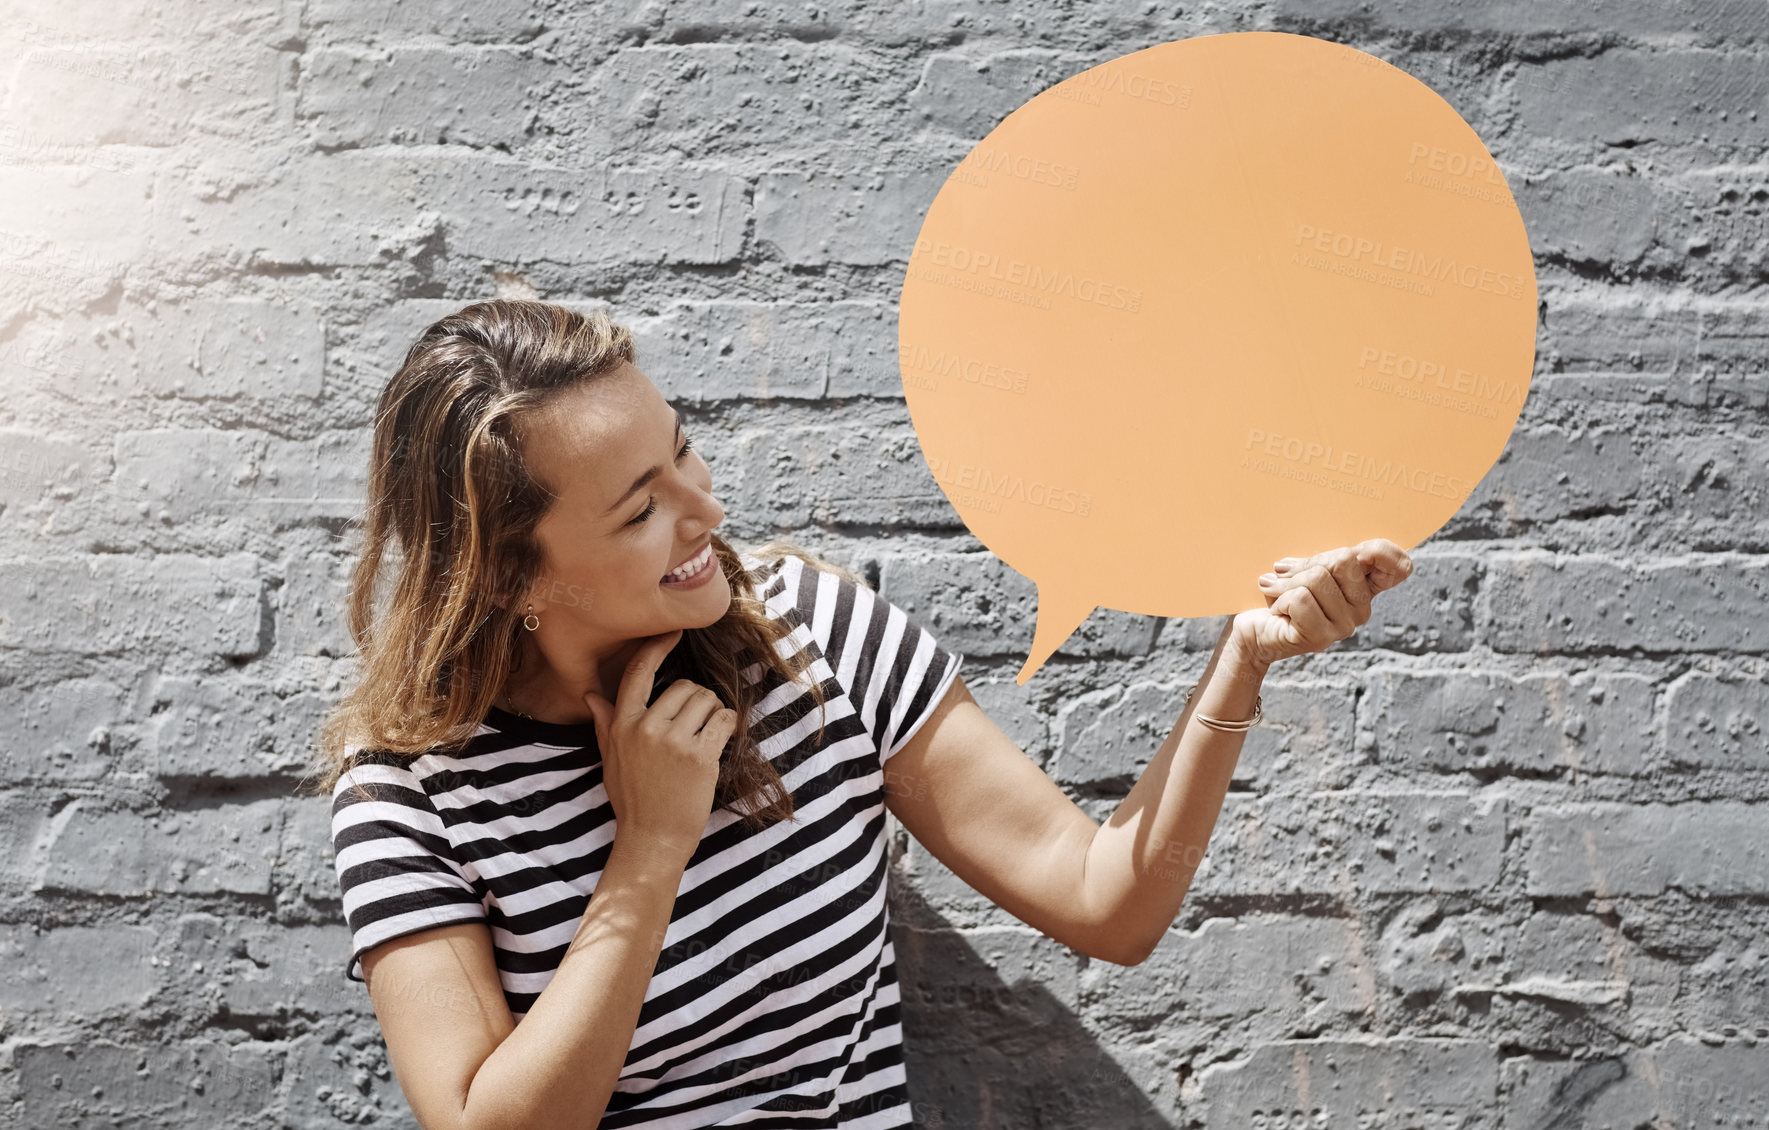 Buy stock photo Shot of a cheerful young woman holding a speech bubble against a brick wall outside